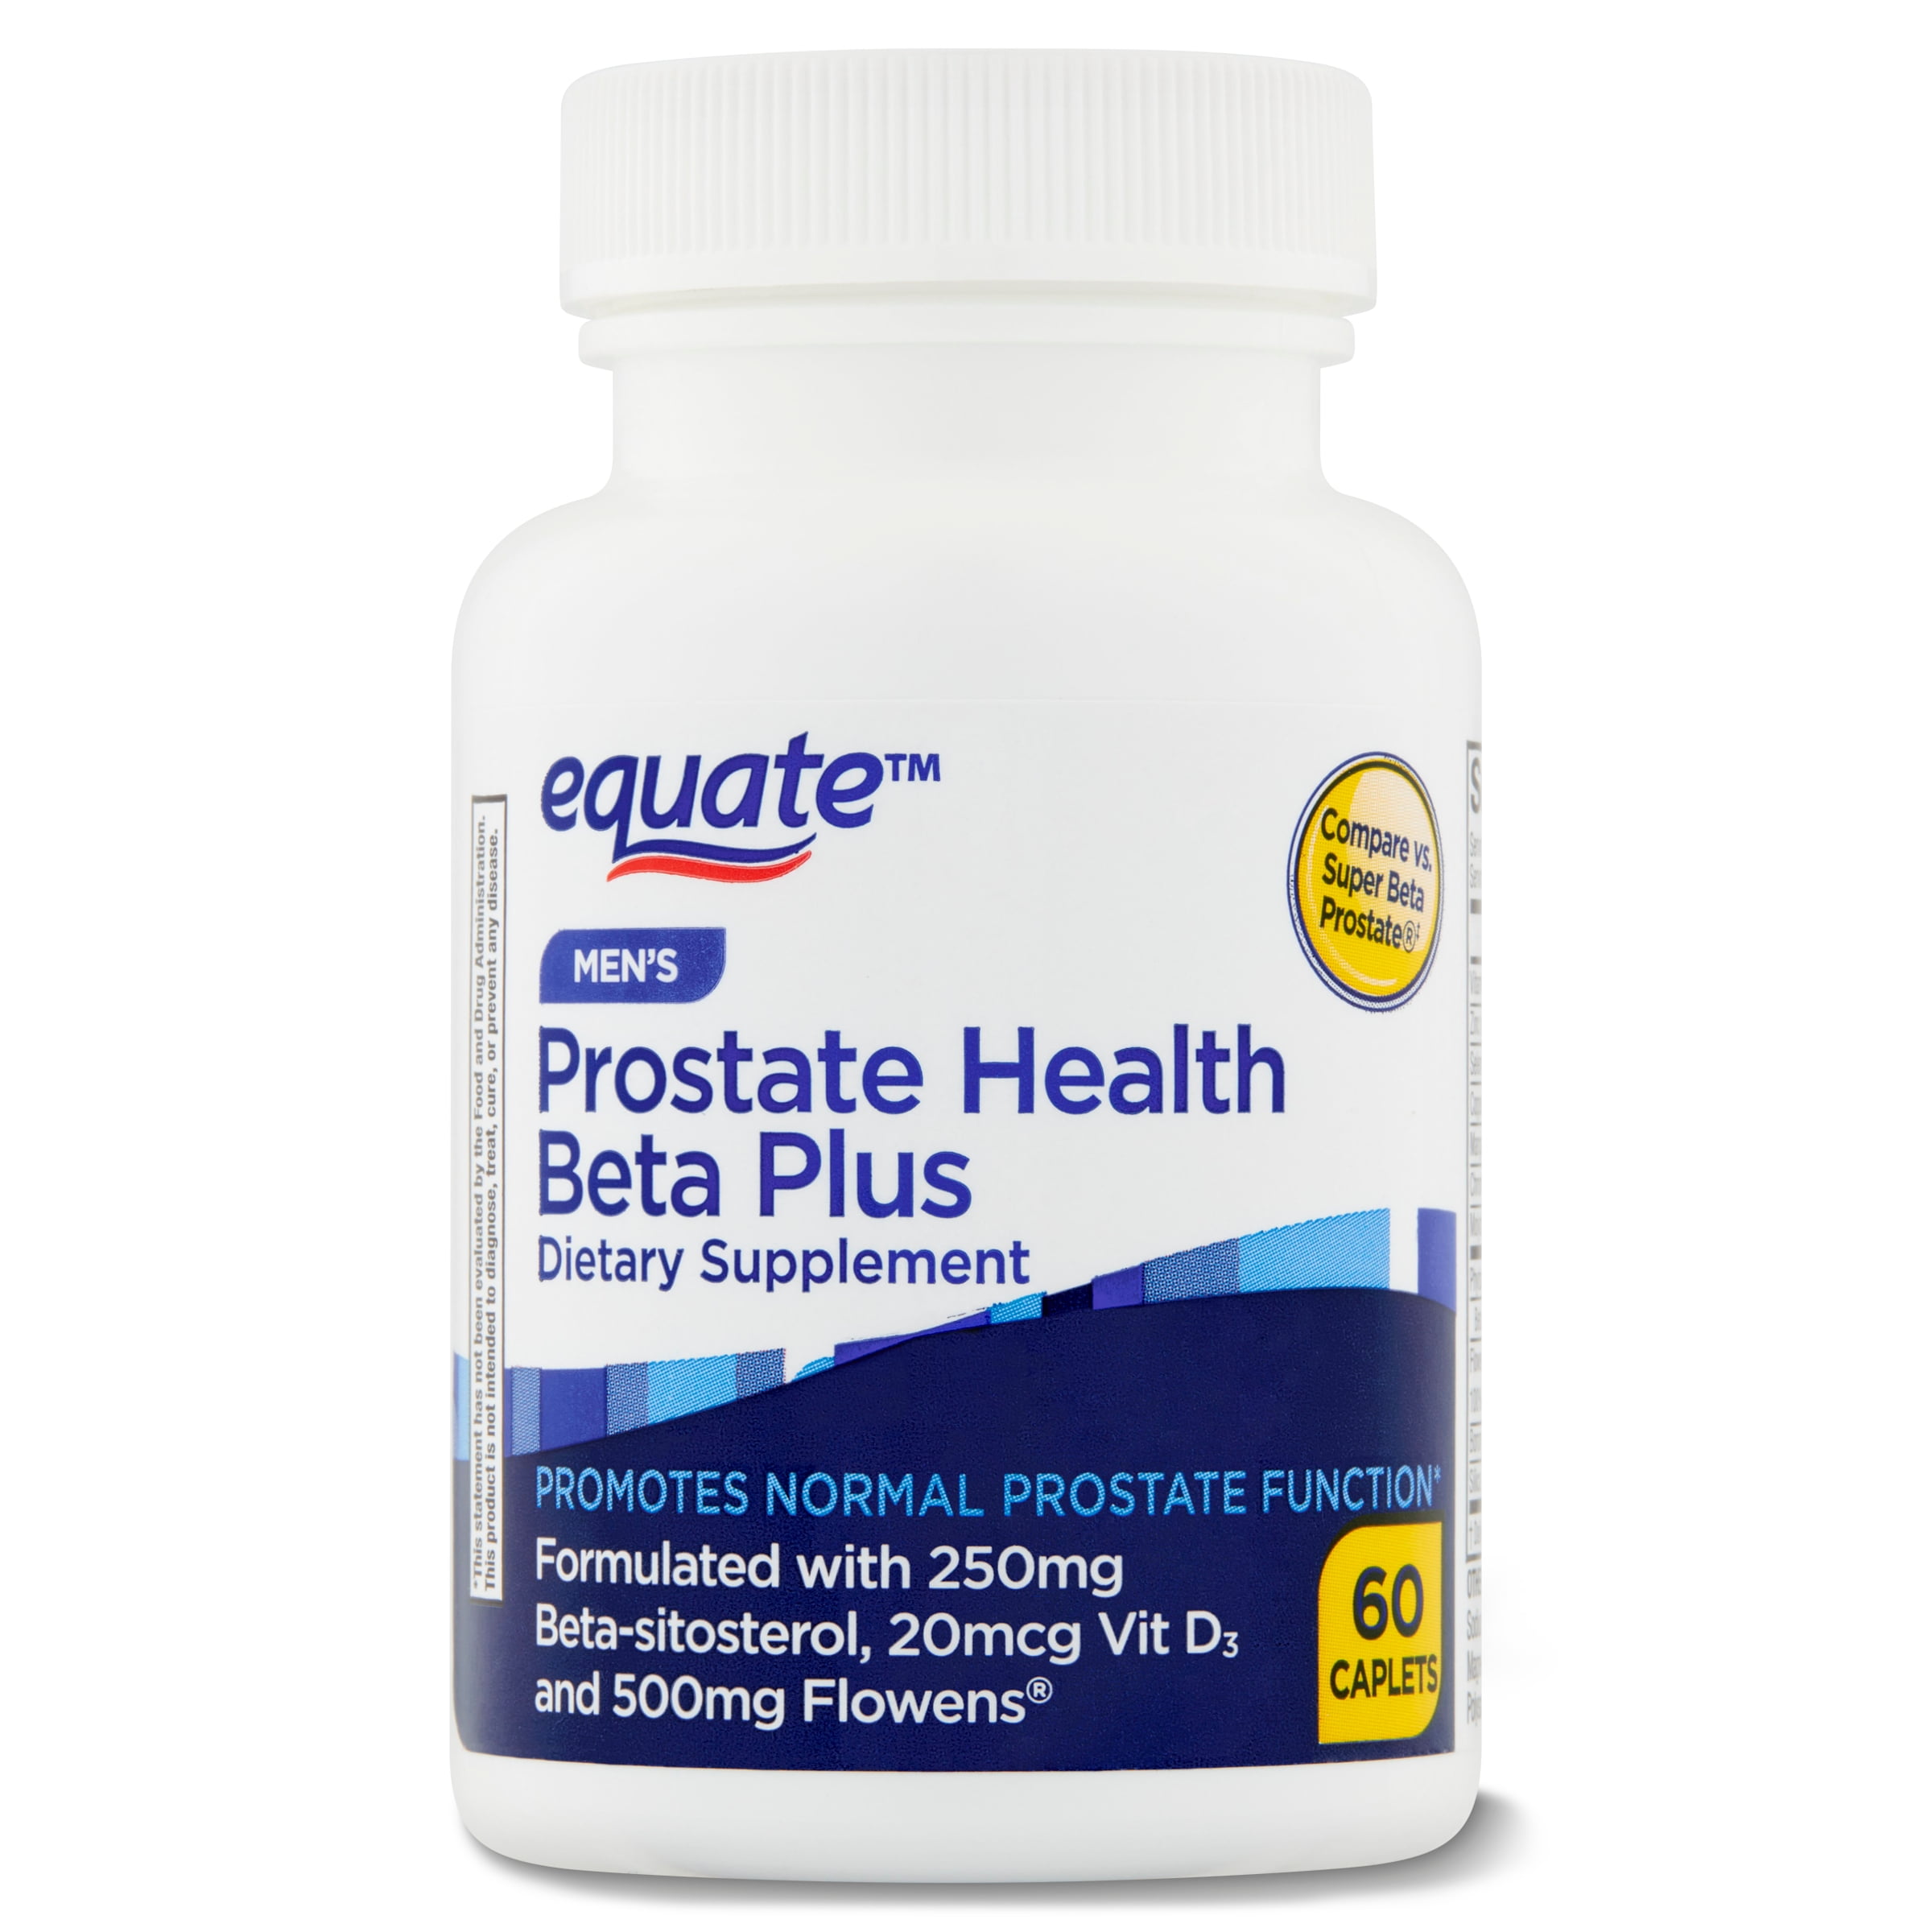 Prostate Support 5000 Promotes Prostate Health Urinary Function Aid 60 Capsules 